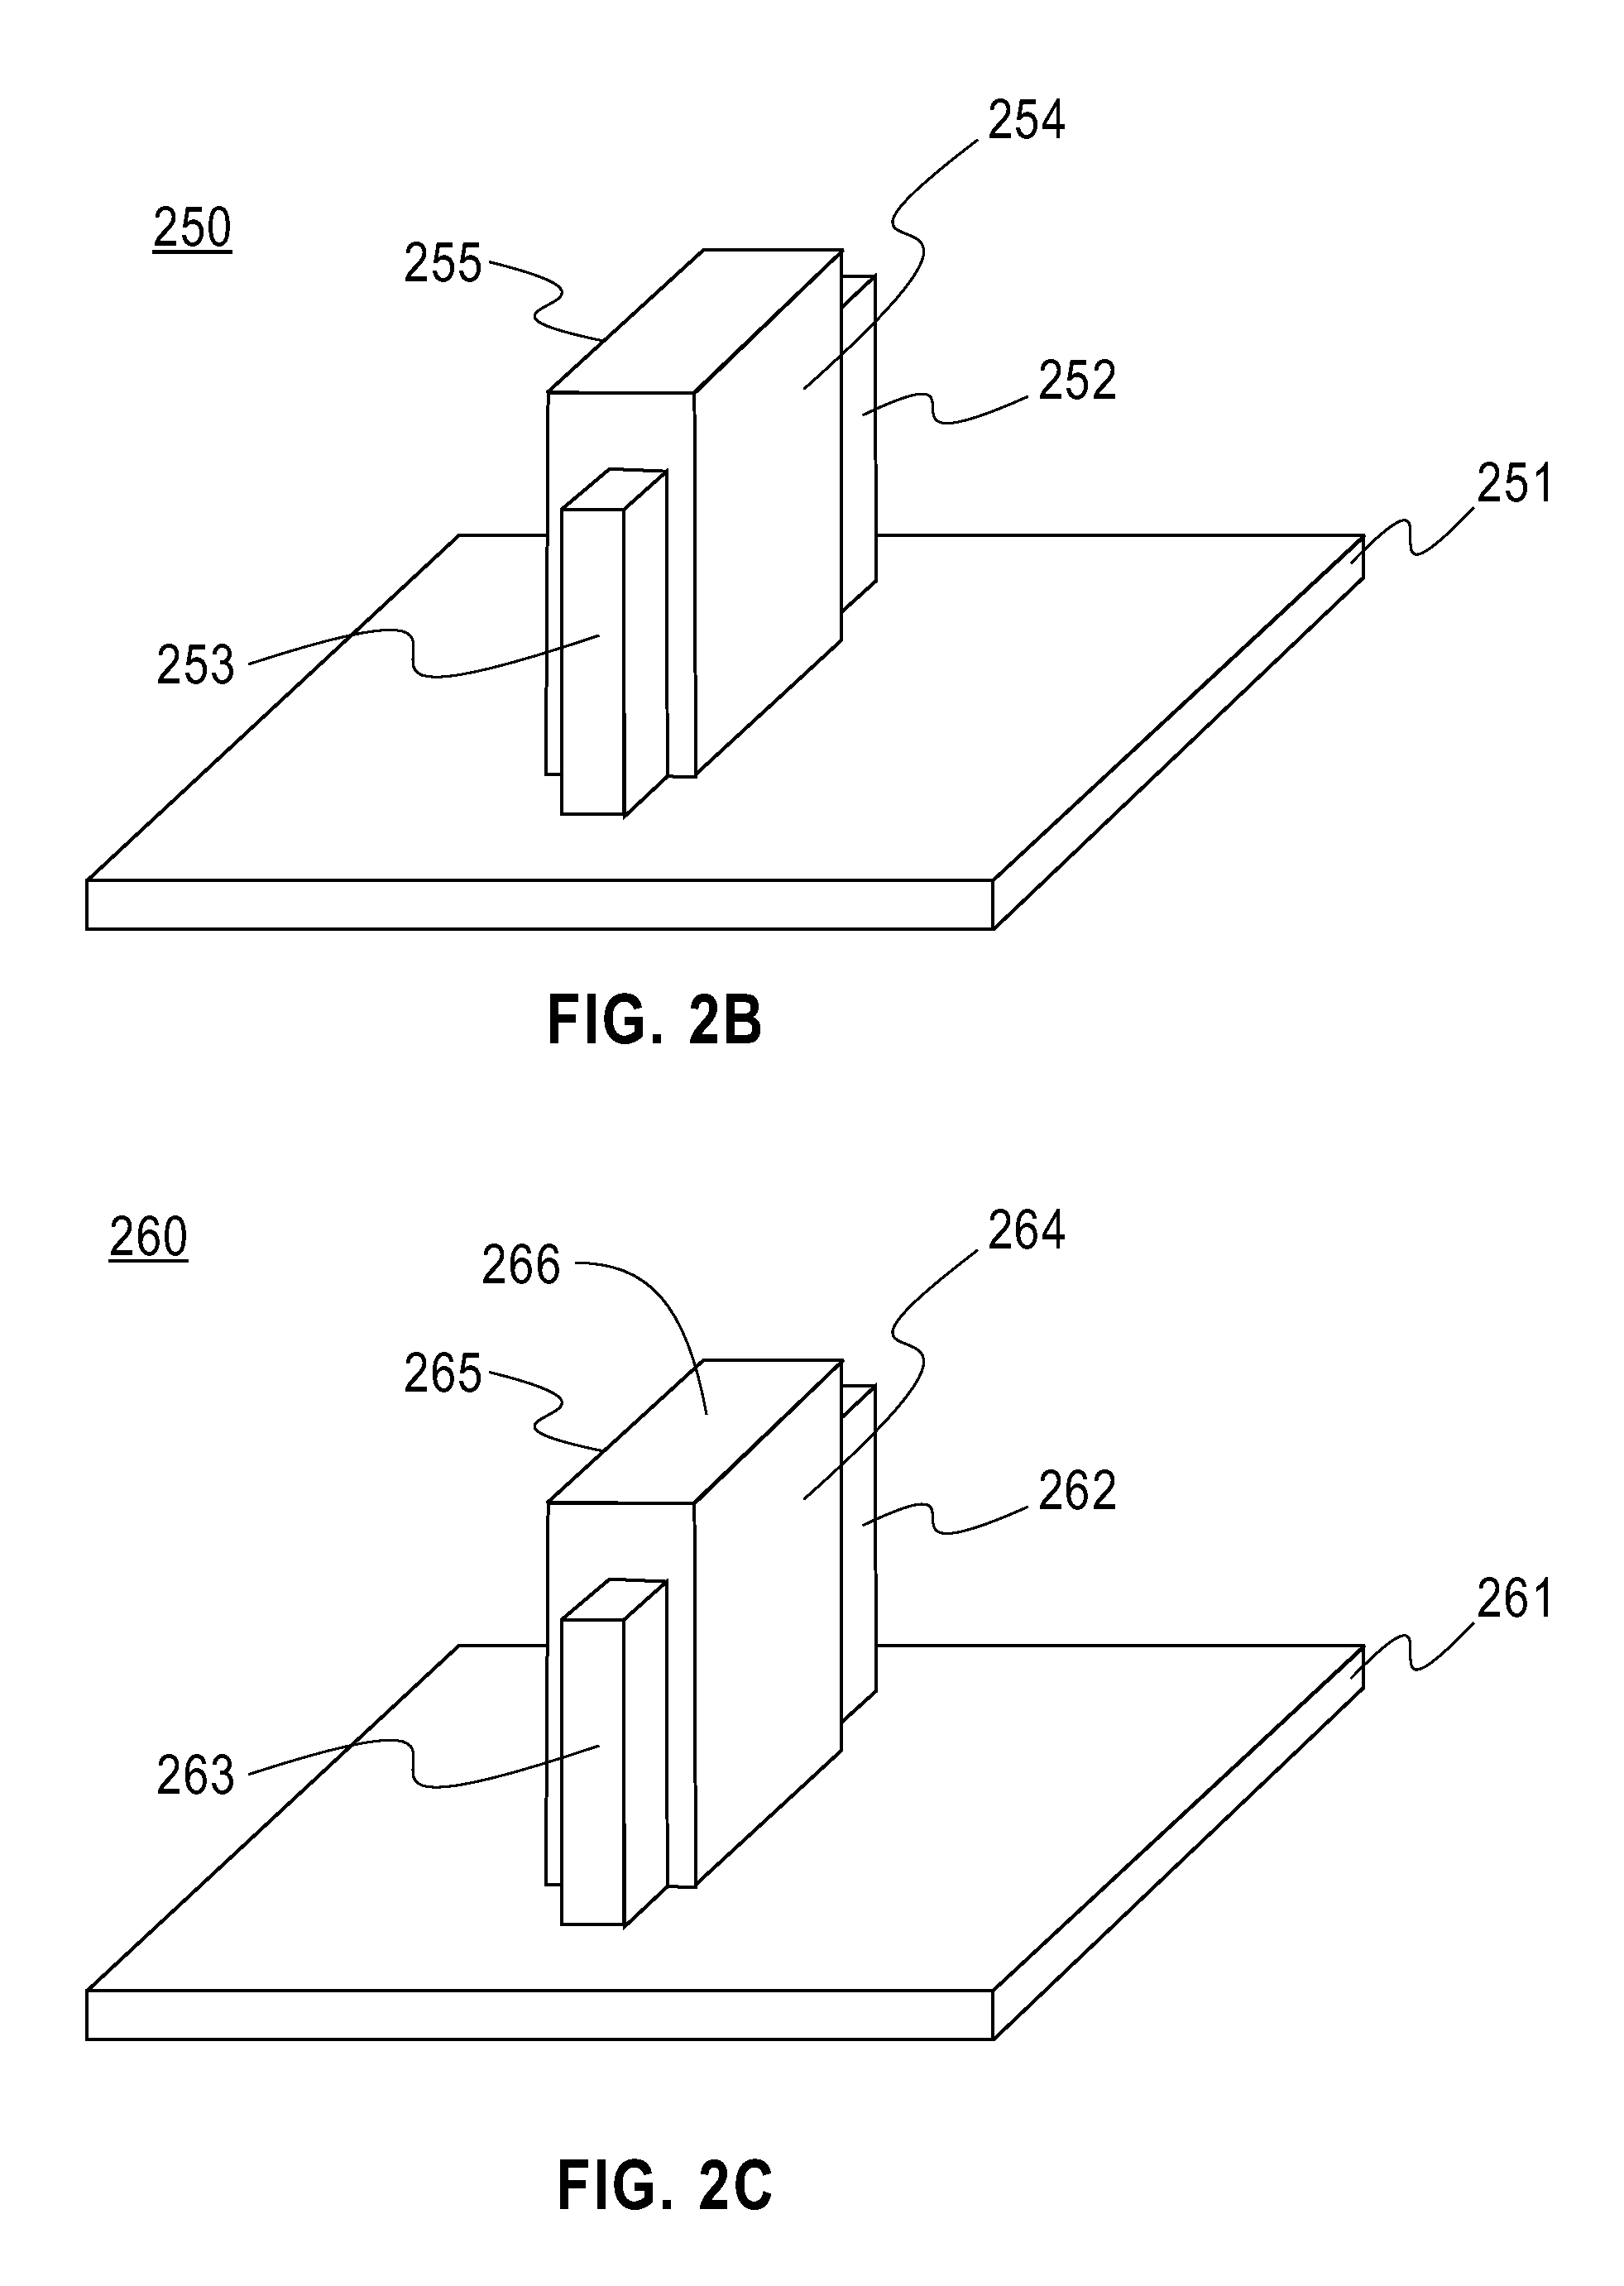 Semiconductor device including back-gated transistors and method of fabricating the device